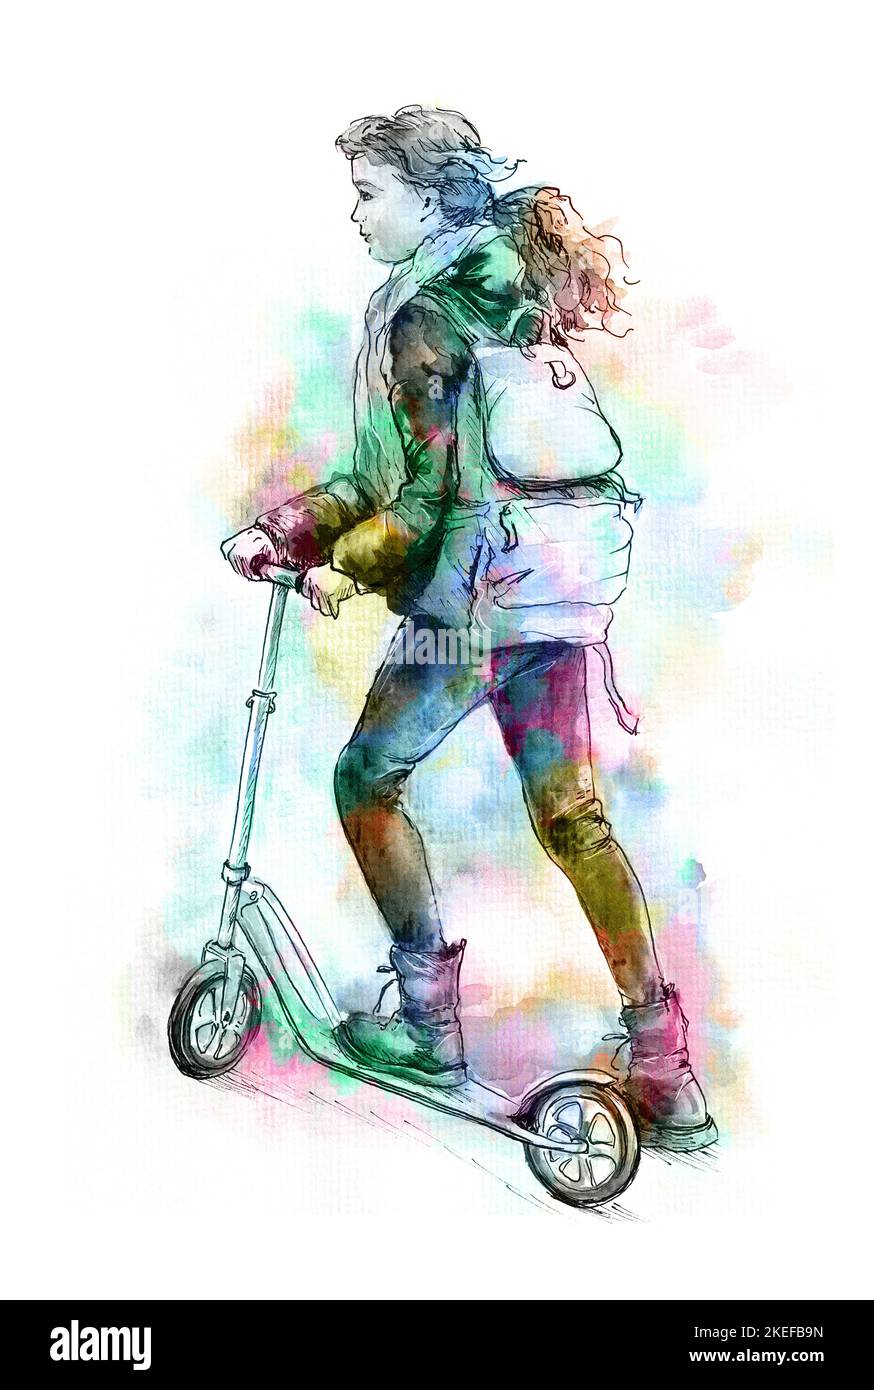 Girl riding scooter to school. Hand drawn watercolour illustration in grunge technique. Isolated on white background. Stock Photo